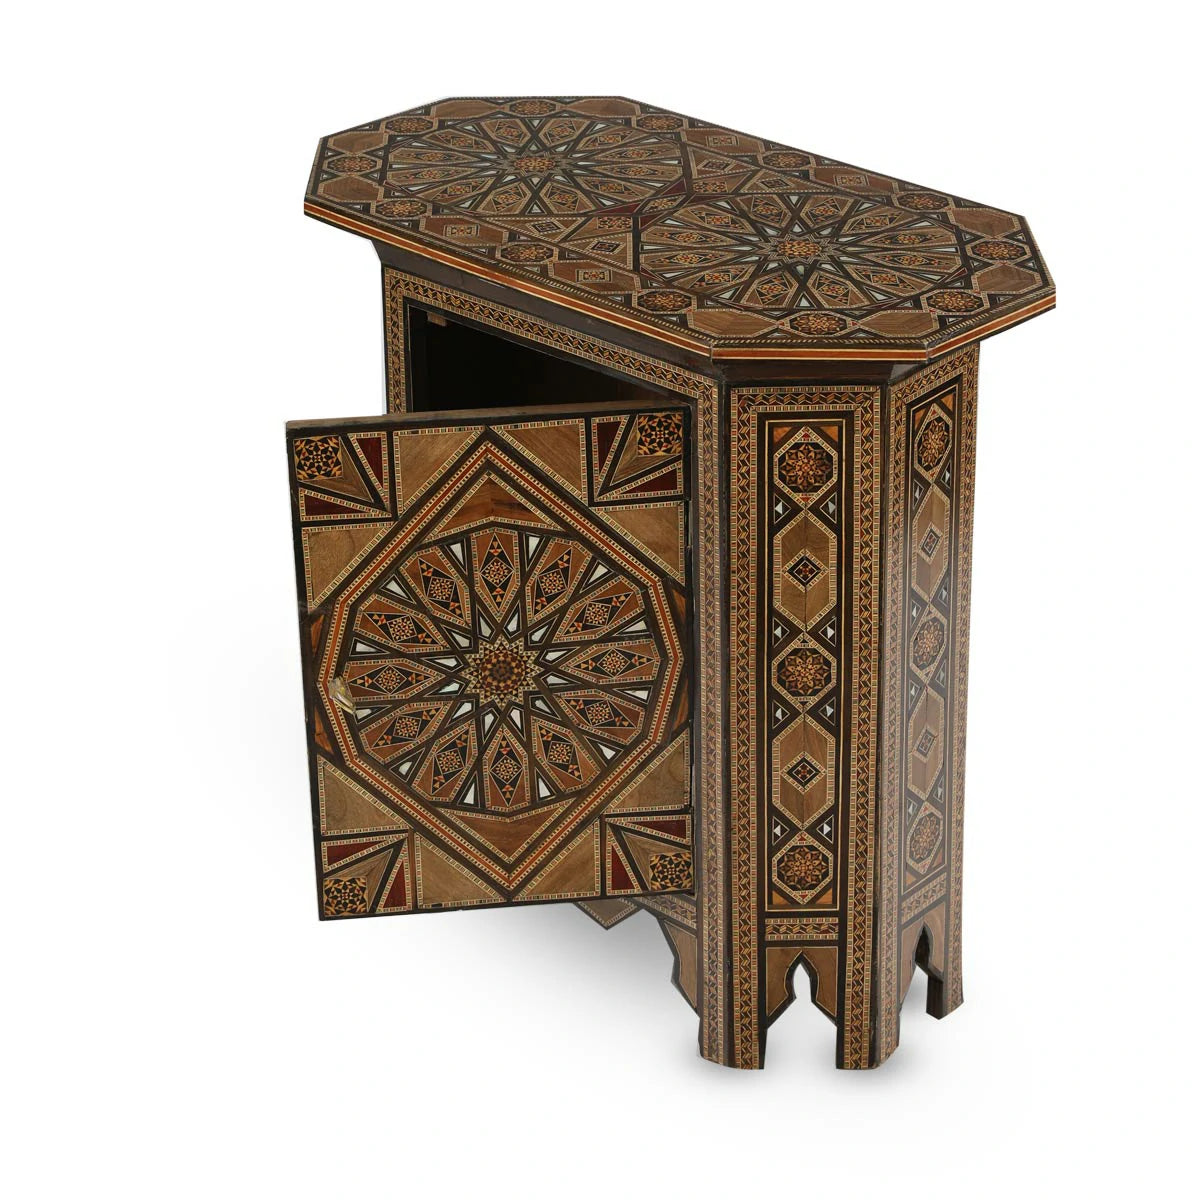 Syrian Marquetry Inlaid Side Table with Storage Compartment